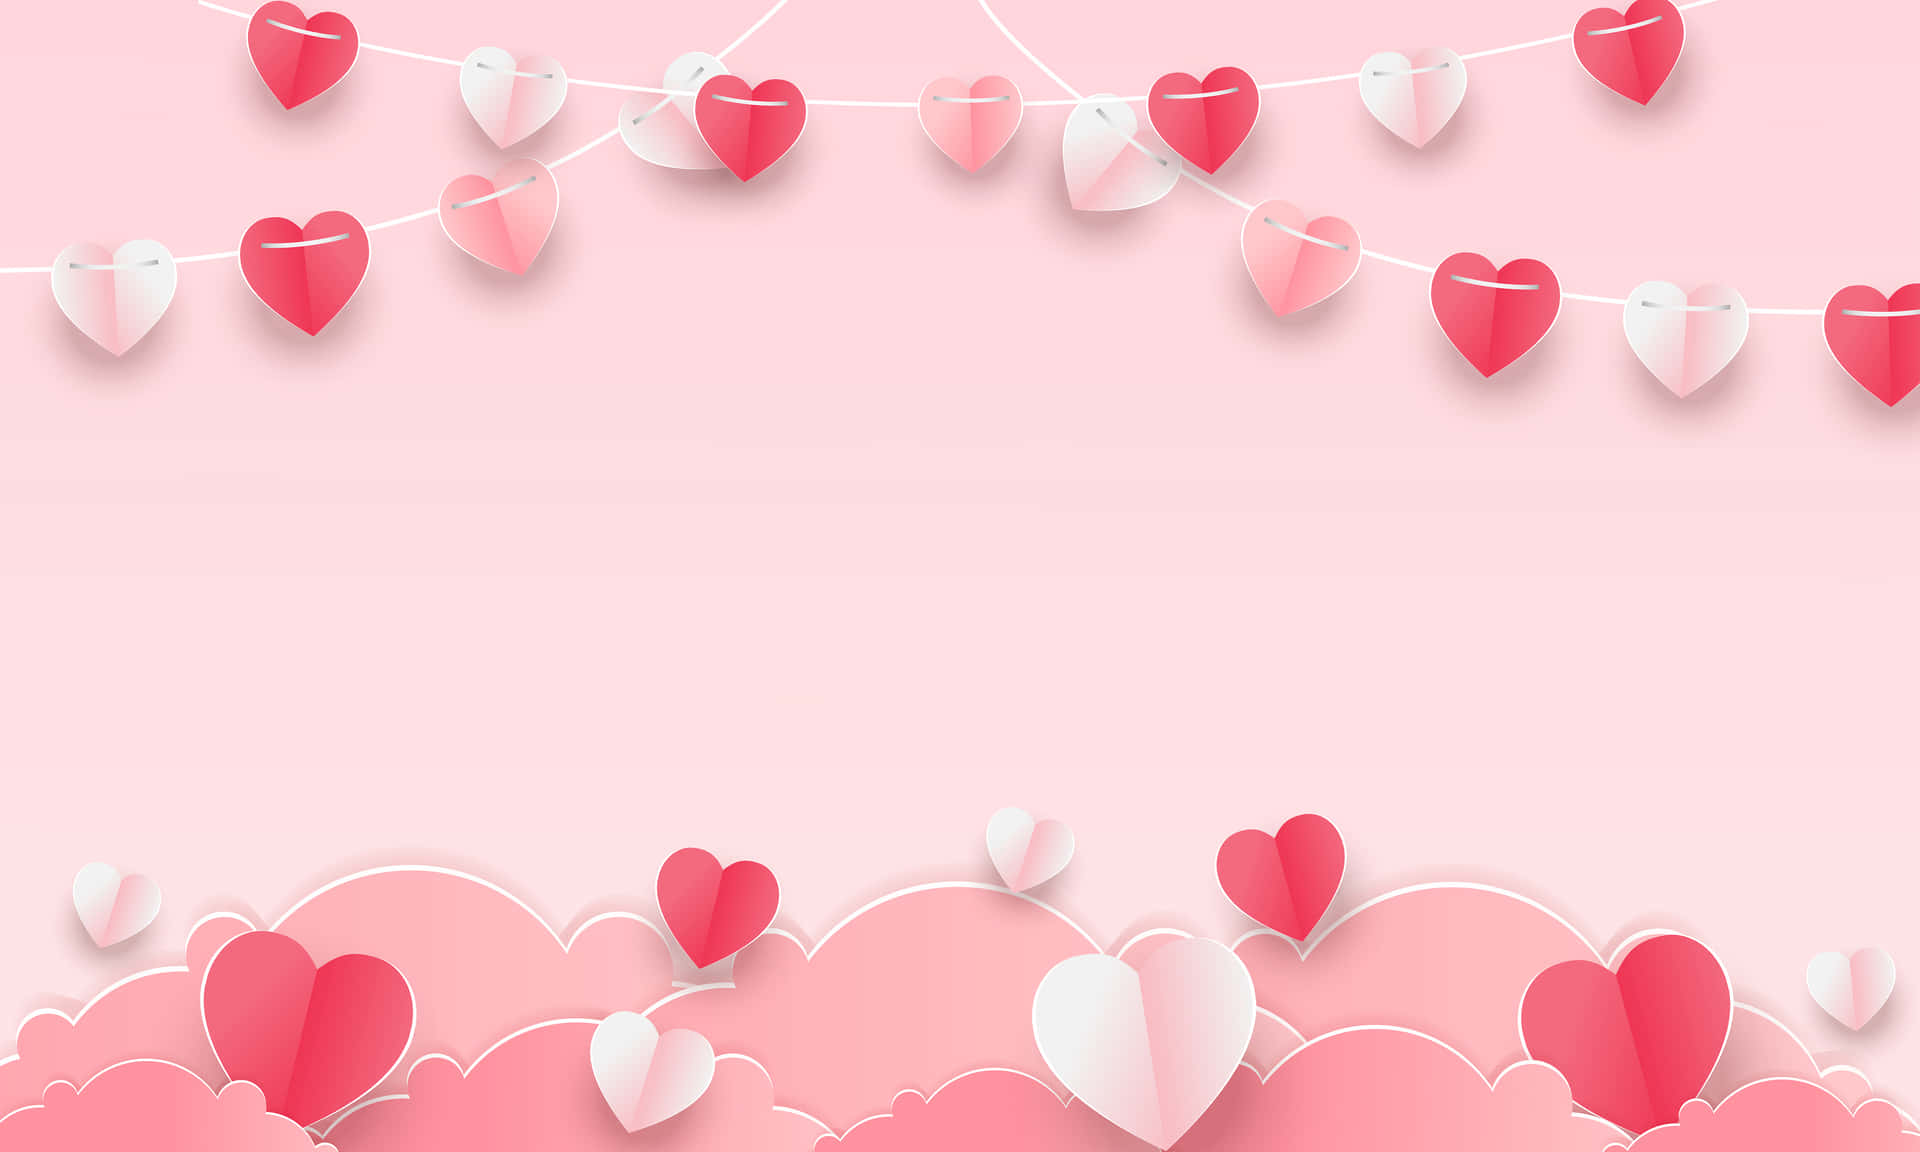 paper hearts hanging from a string on a pink background